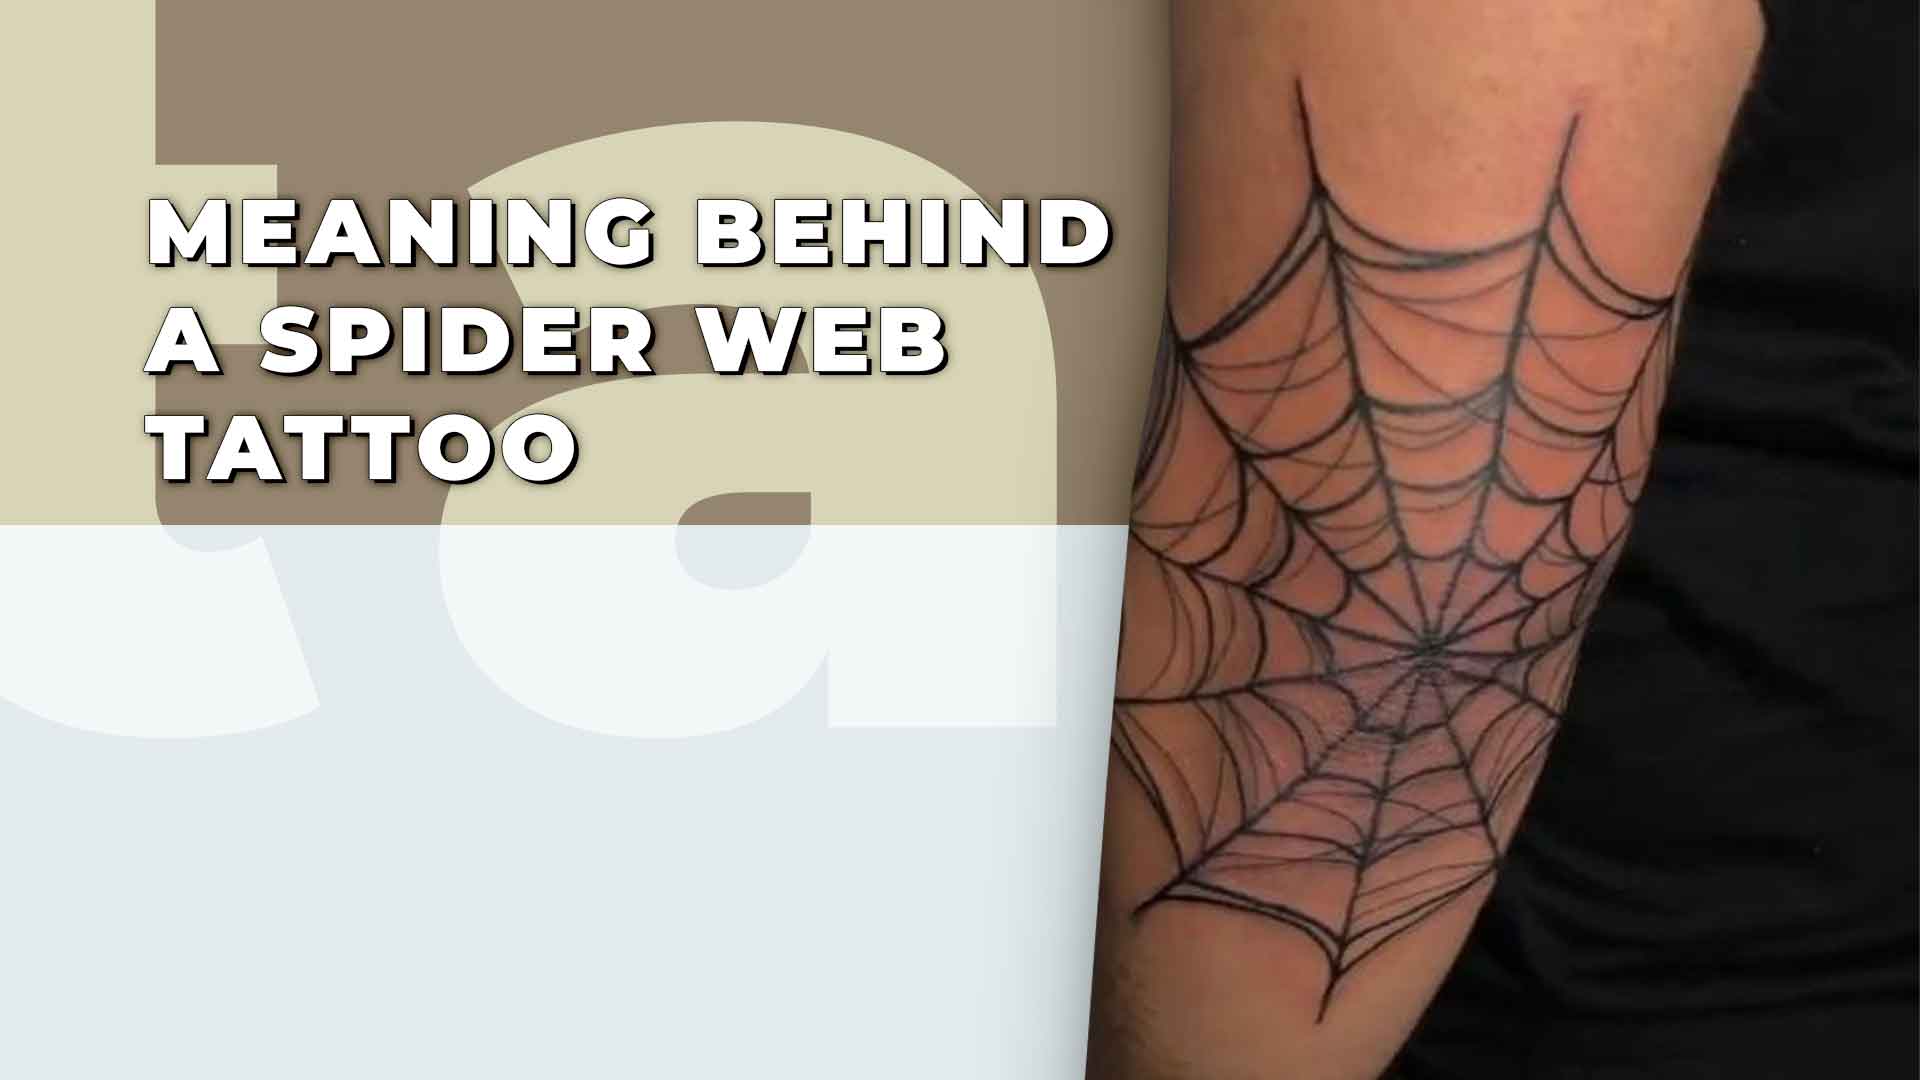 debbie spees recommends web on elbow tattoo pic